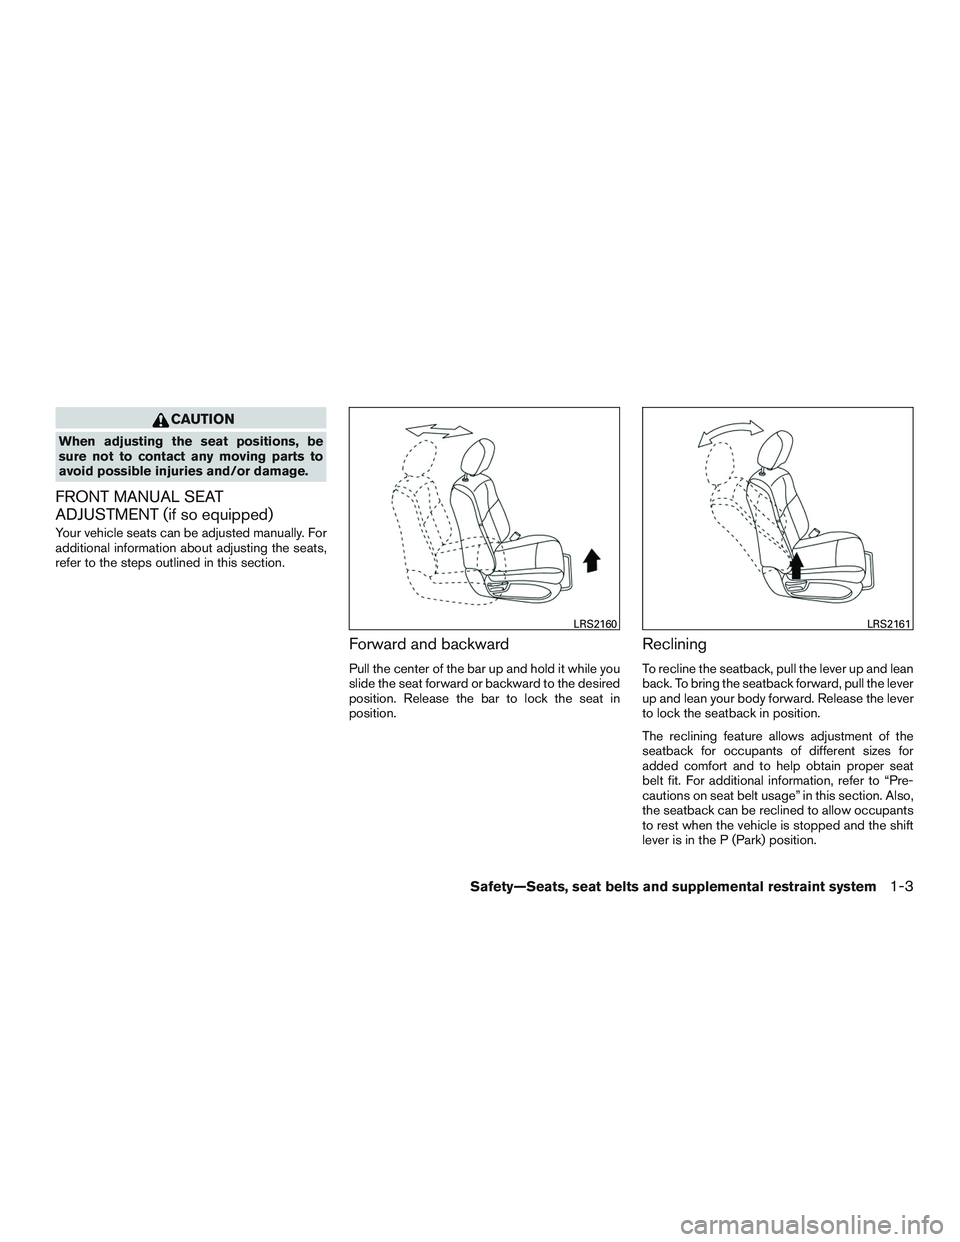 NISSAN ROGUE 2016  Owner´s Manual CAUTION
When adjusting the seat positions, be
sure not to contact any moving parts to
avoid possible injuries and/or damage.
FRONT MANUAL SEAT
ADJUSTMENT (if so equipped)
Your vehicle seats can be adj